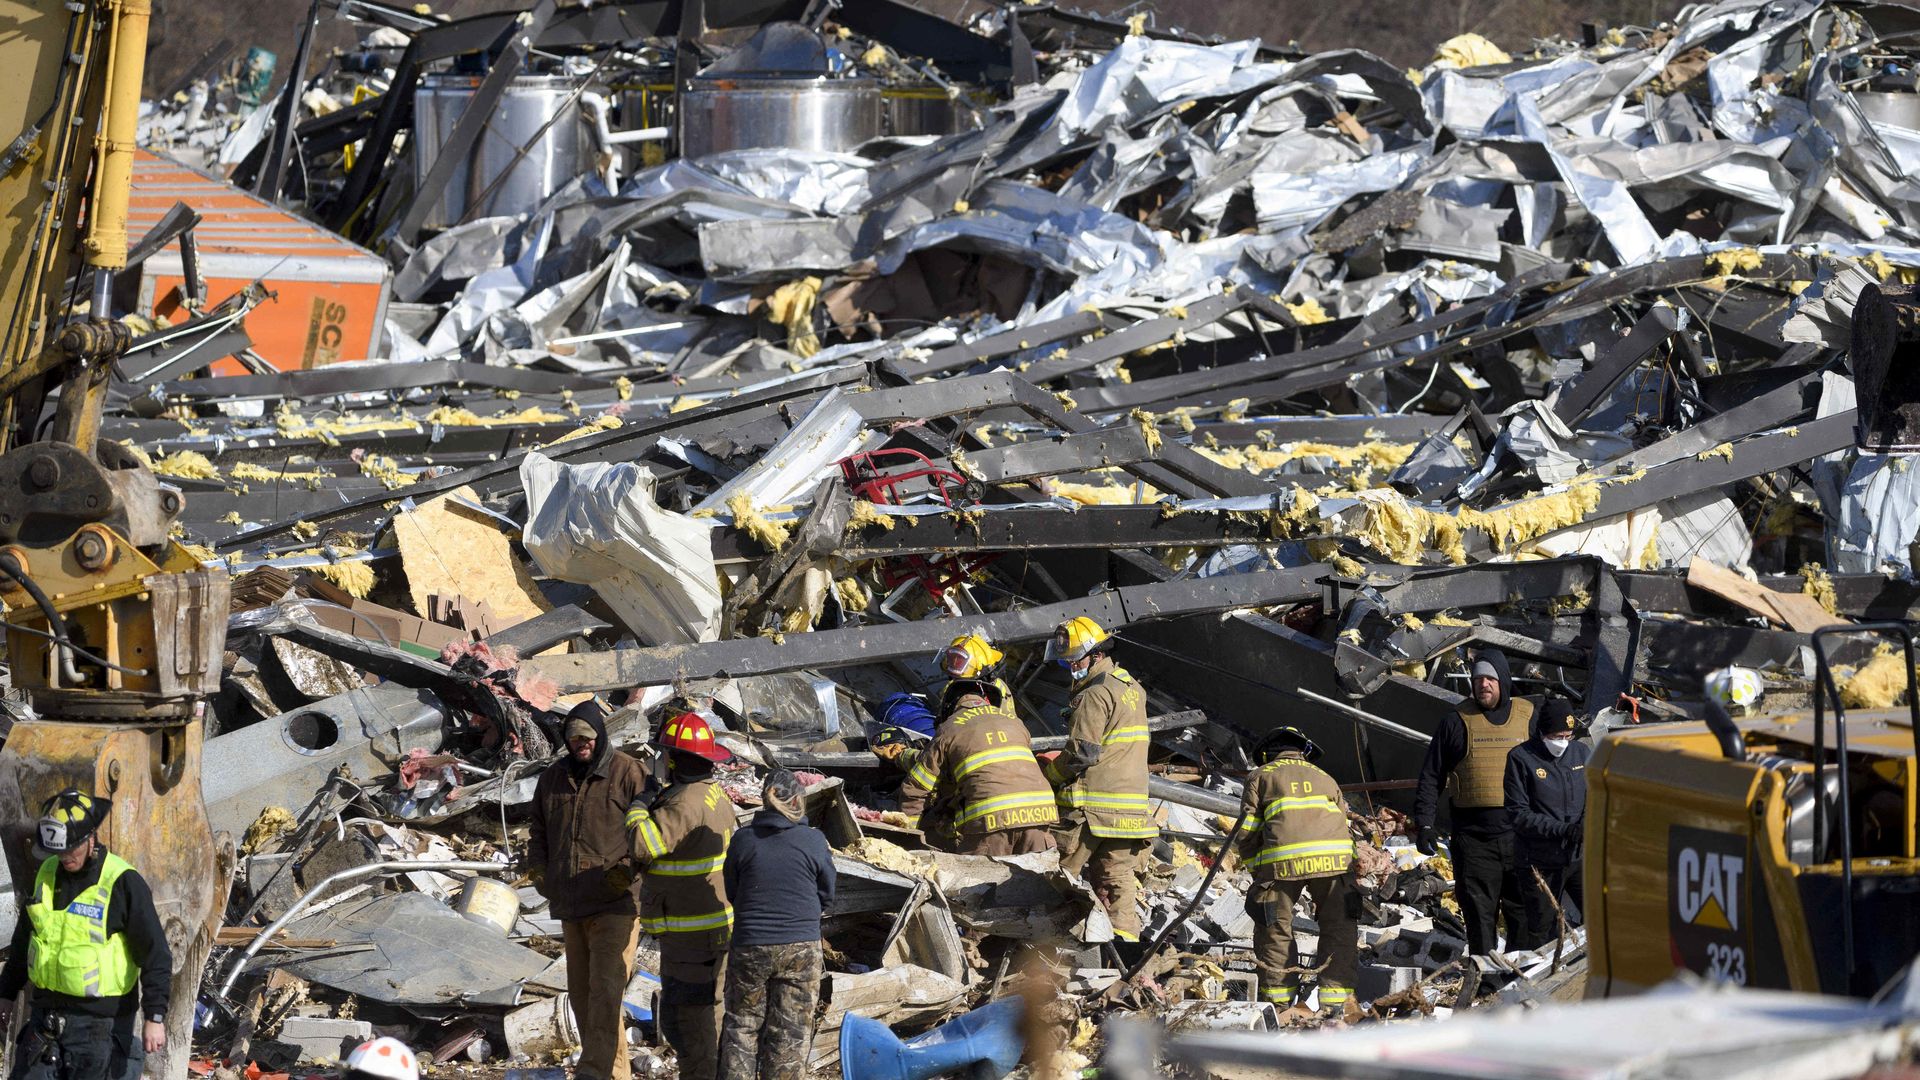 Emergency workers search through what is left of the Mayfield Consumer Products Candle Factory after it was destroyed by a tornado in Mayfield, Kentucky, on December 11, 2021. 